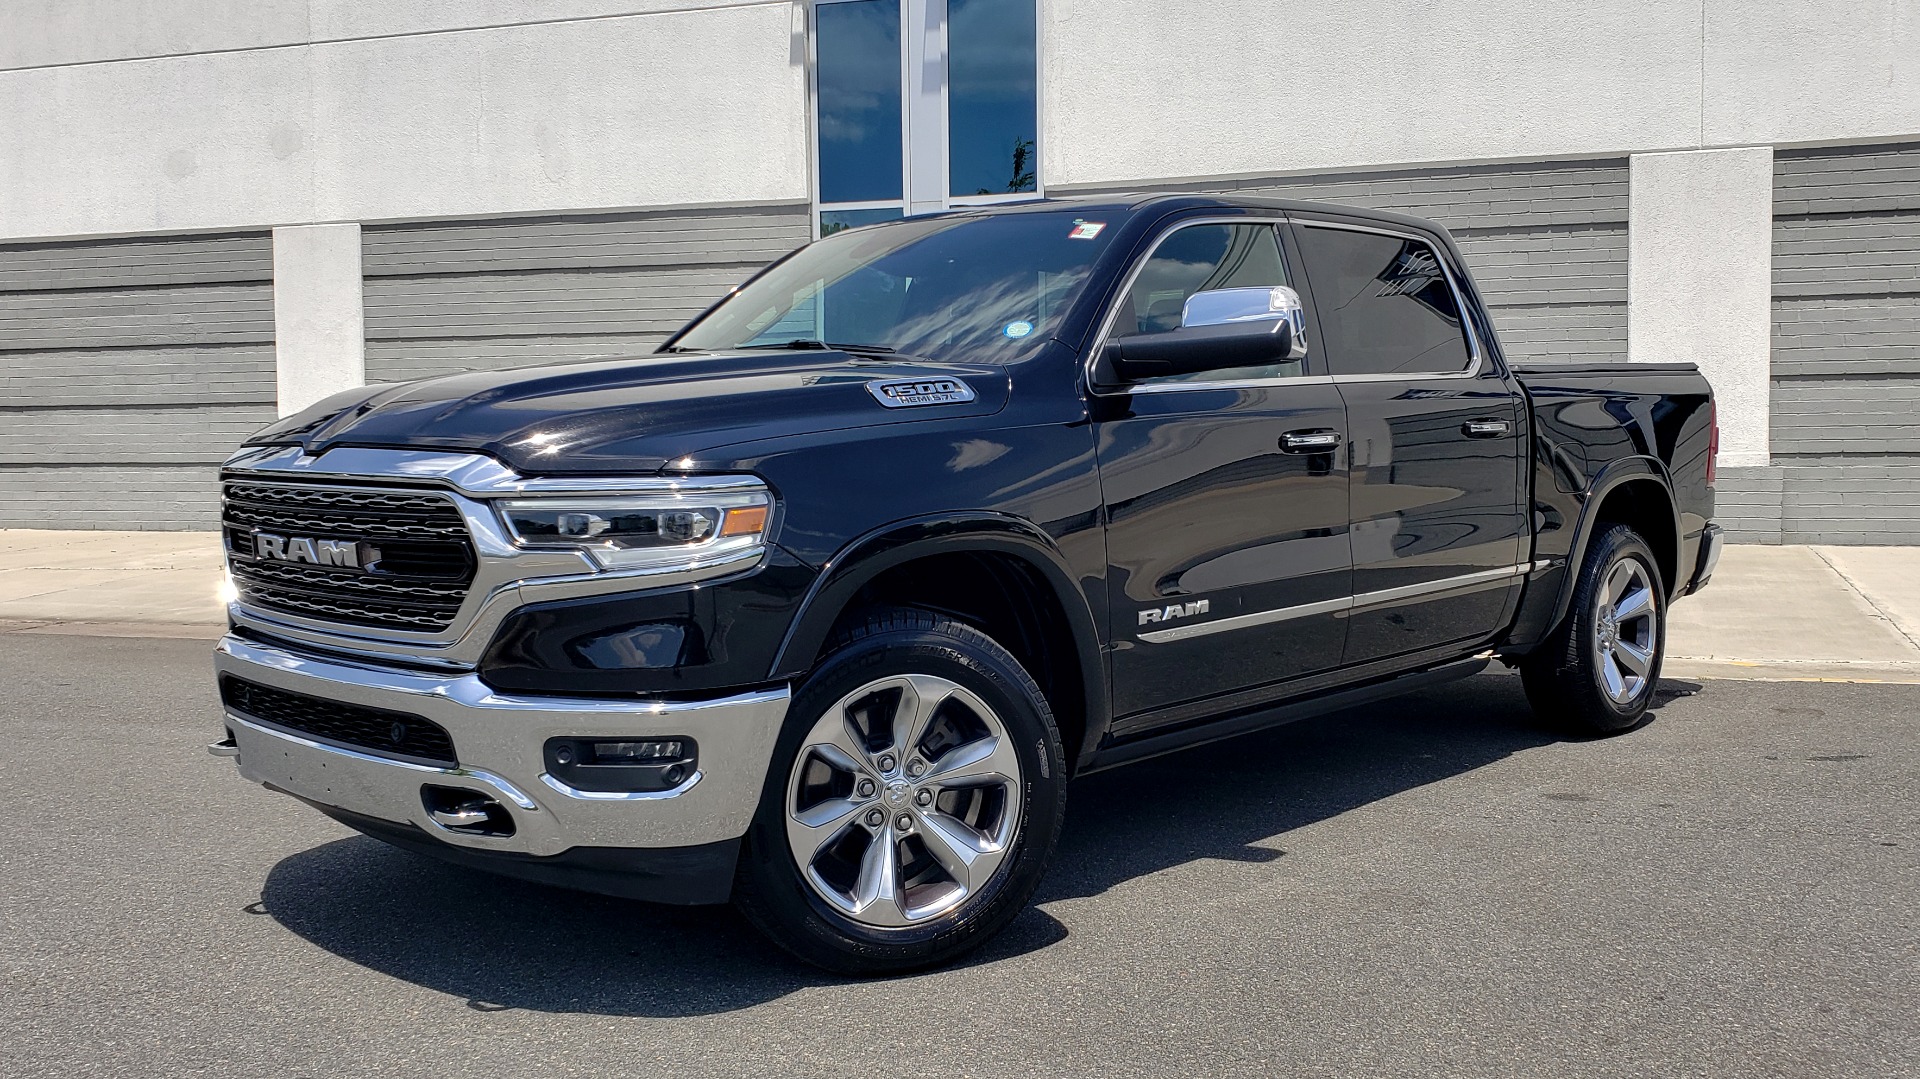 Used 2019 Ram 1500 LIMITED / NAV / PANO-ROOF / TOW PKG / H/K SND / REARVIEW for sale Sold at Formula Imports in Charlotte NC 28227 1